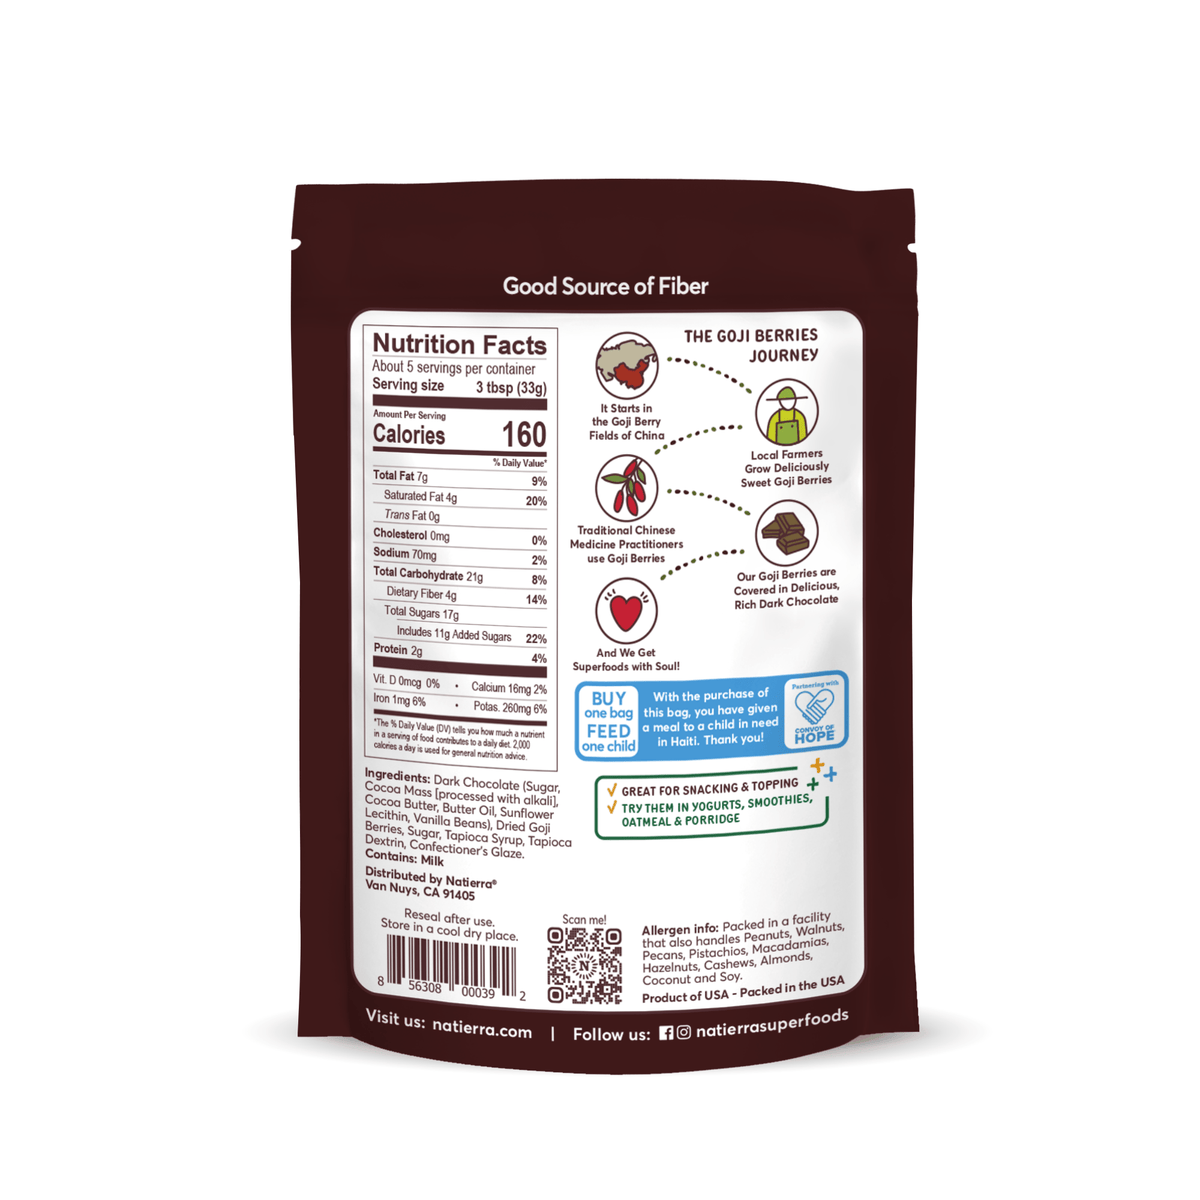 Natierra Dark Chocolate Goji Berries nutrition facts, journey and product claims